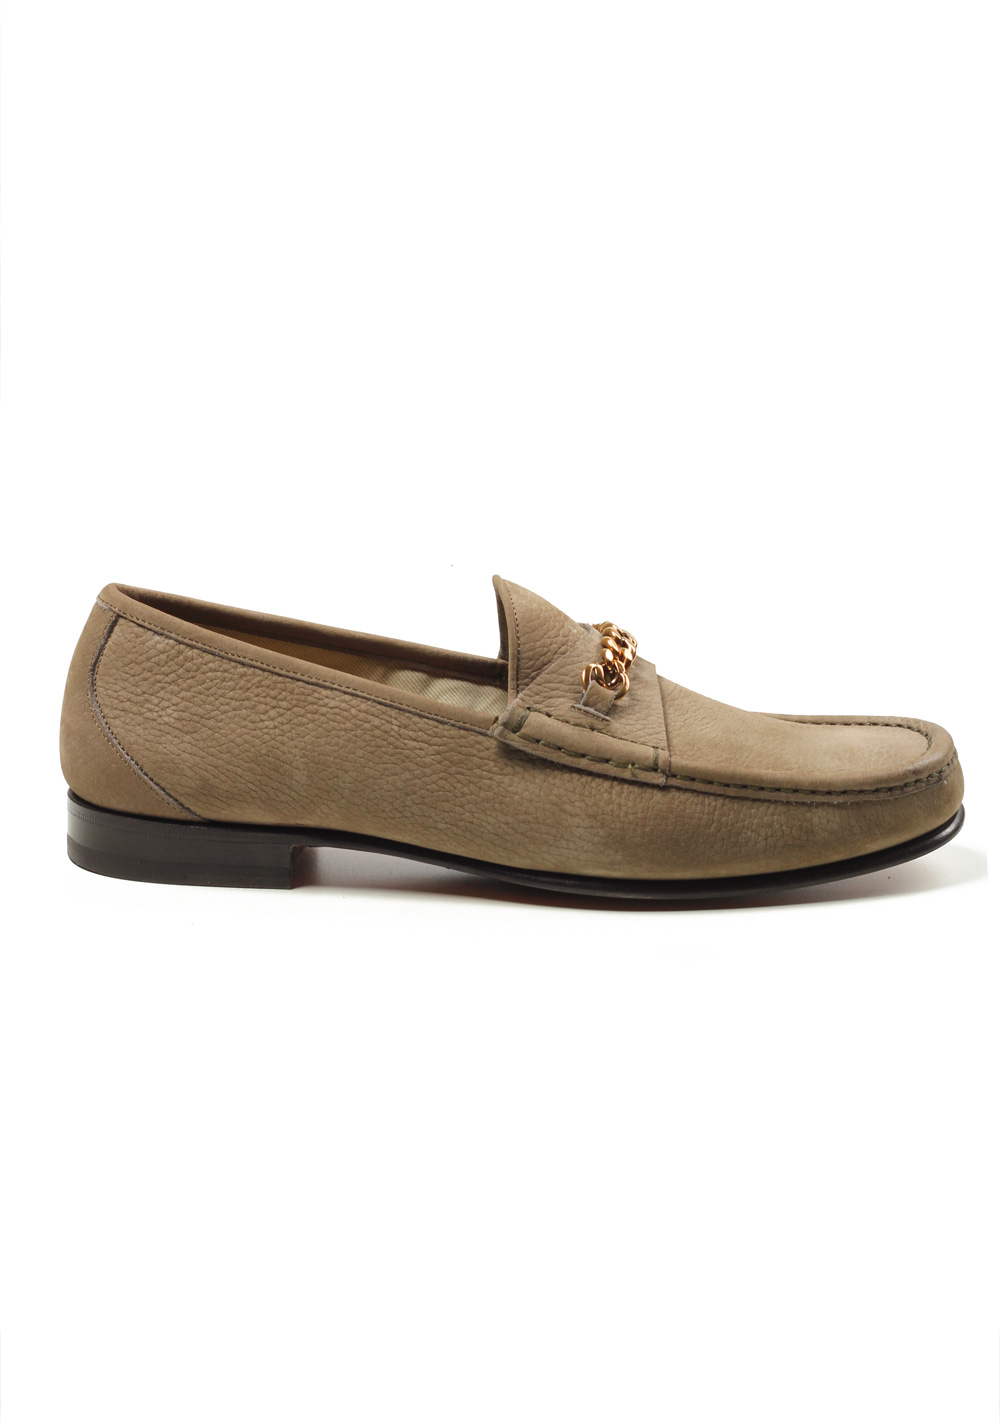 TOM FORD York Beige Nubuck Leather Chain Loafers Shoes Size 8,5 UK / 9,5 U.S. | Costume Limité